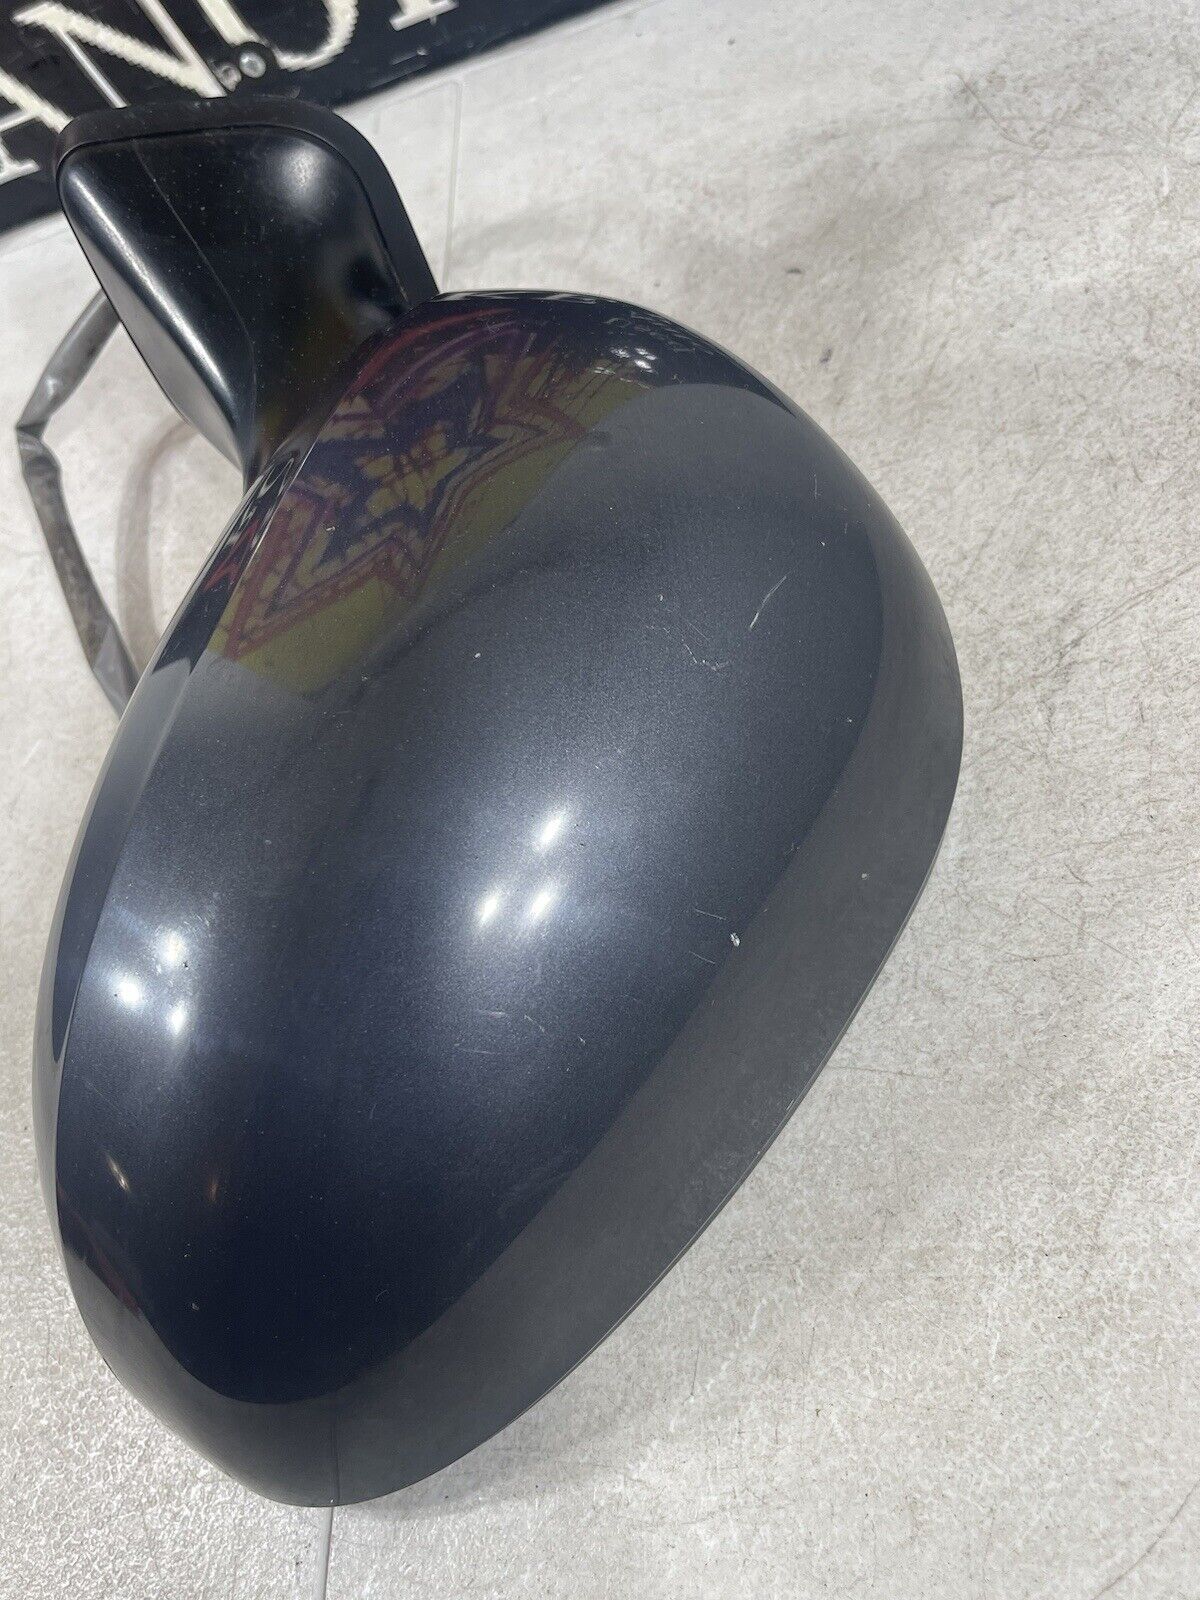 Toyota Driver Side View Mirror, Avalon Driver Side View Mirror, Driver Side View Mirror